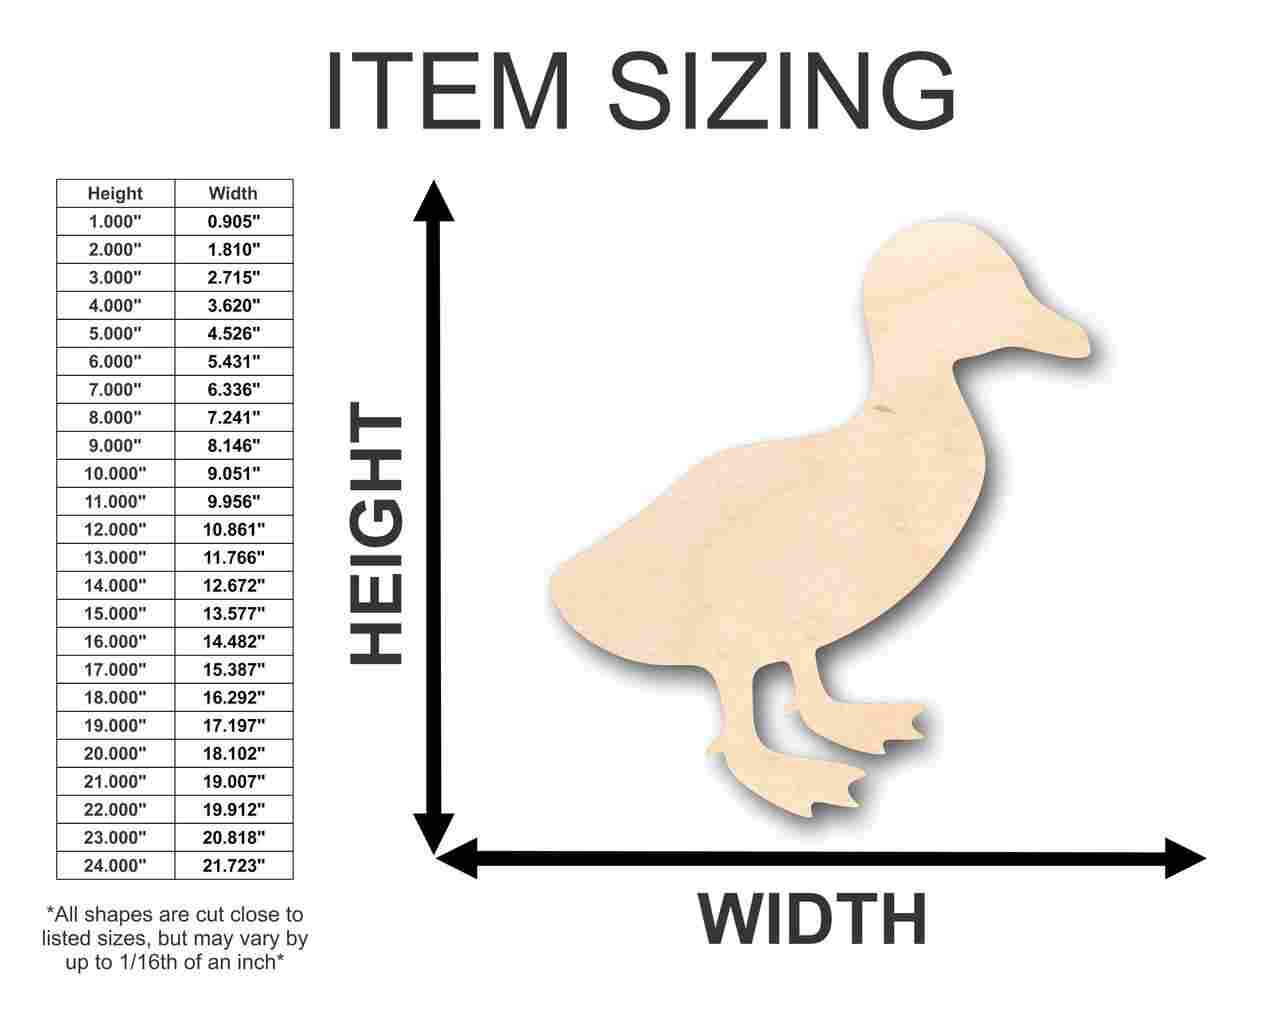 Unfinished Wooden Walking Duck Shape - Animal - Wildlife - Craft - up to 24